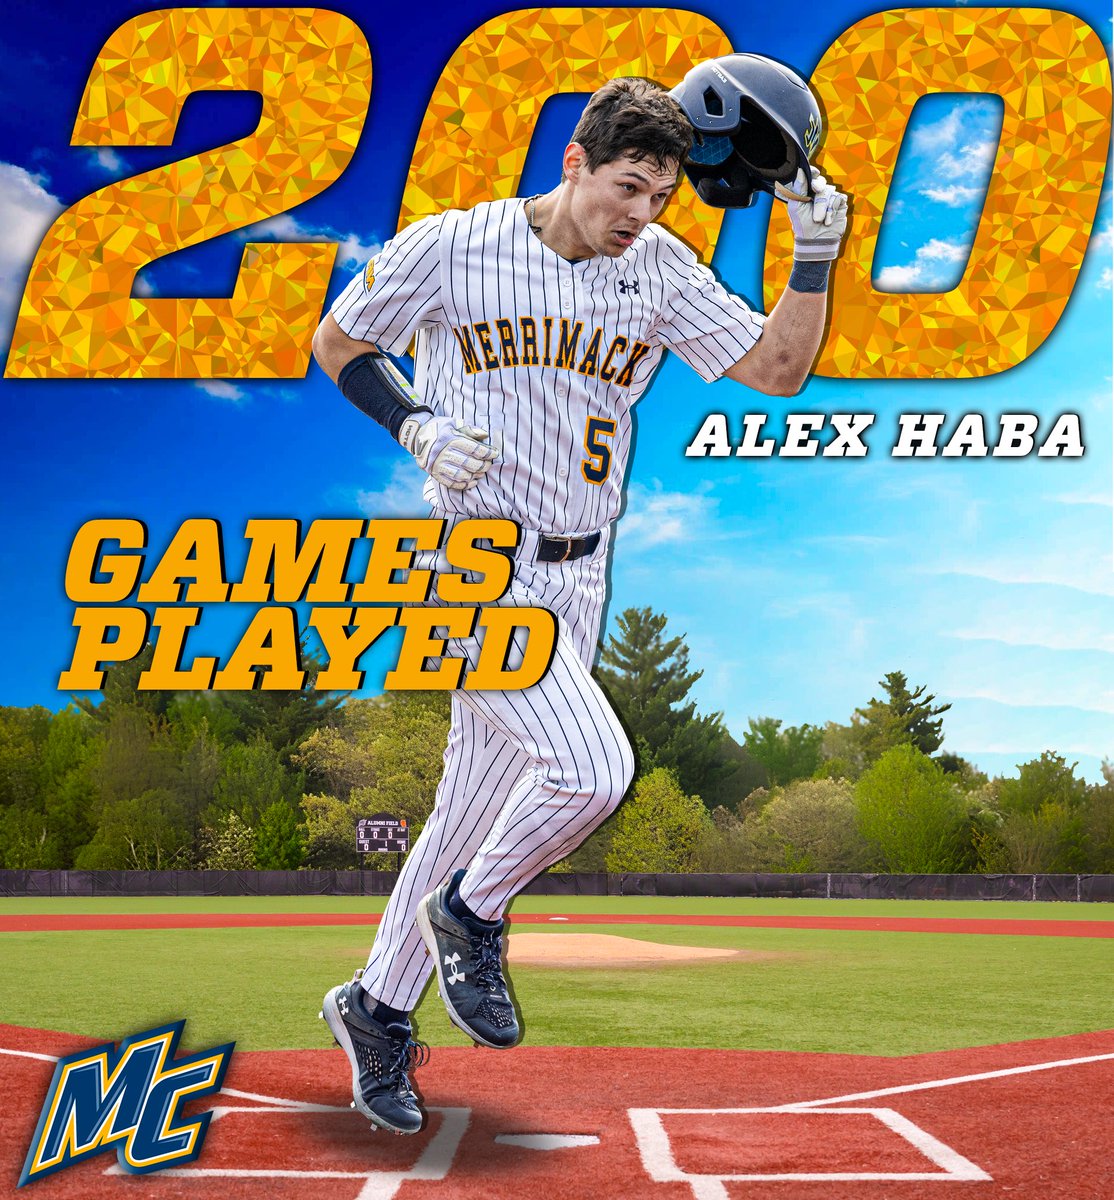 The record for most games played has already been shattered by him and now Alex Haba has hit the 200 career games played mark. He is the first to ever reach 200 games played in Merrimack program history. Congrats Alex! #GoMack